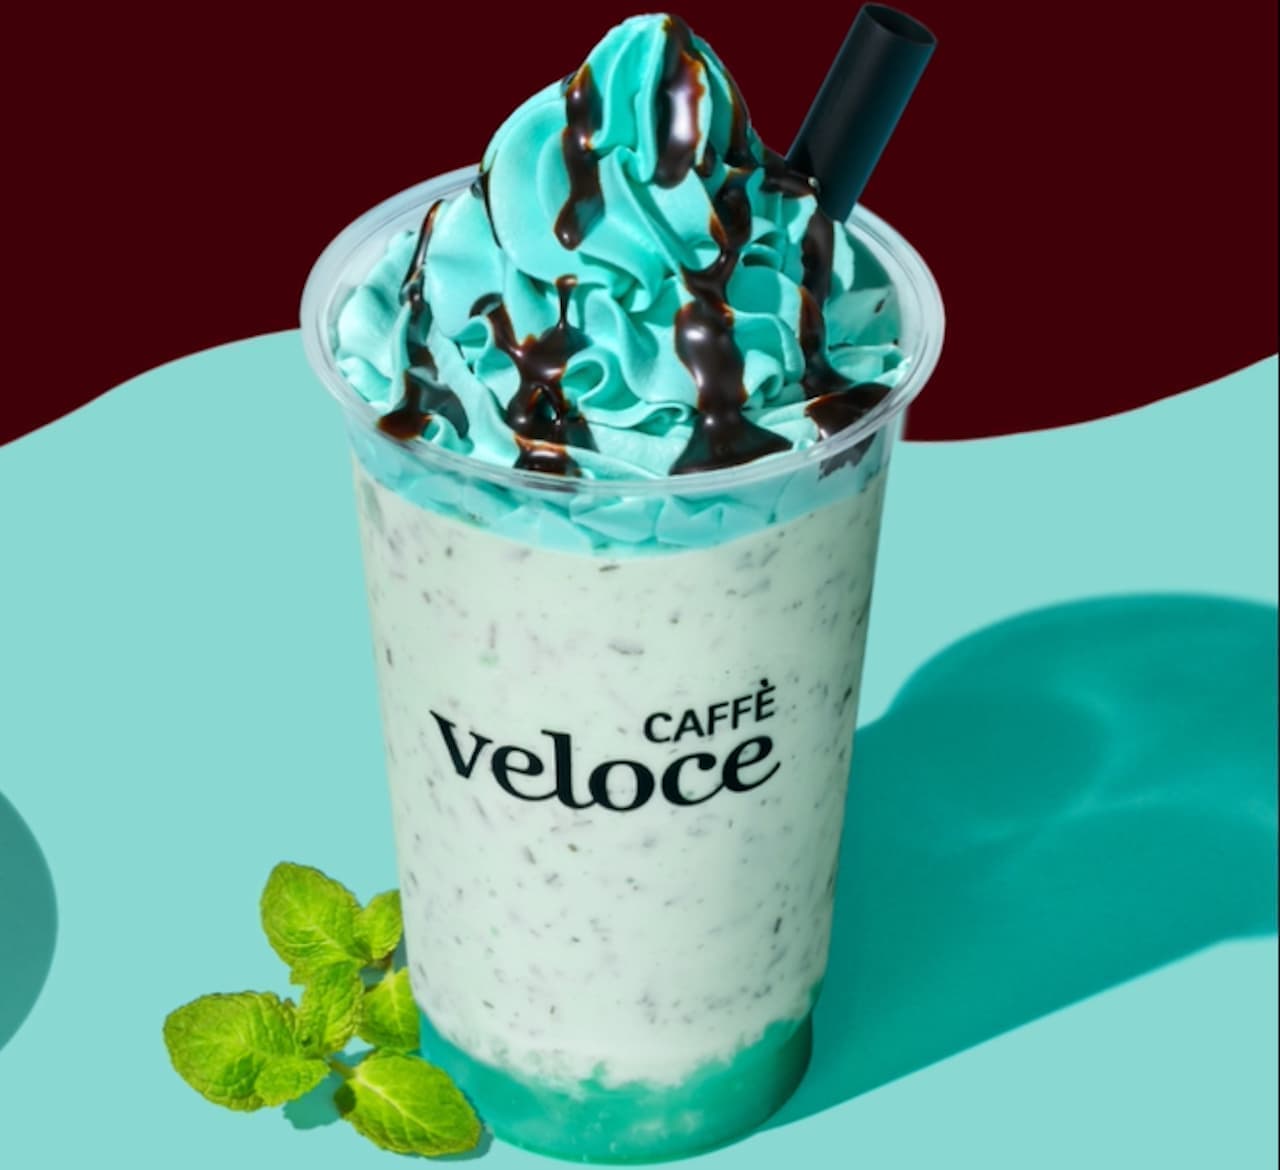 "Chocolate Mint Jelly" and "Chocolate Mint Mont Blanc" on Veloce